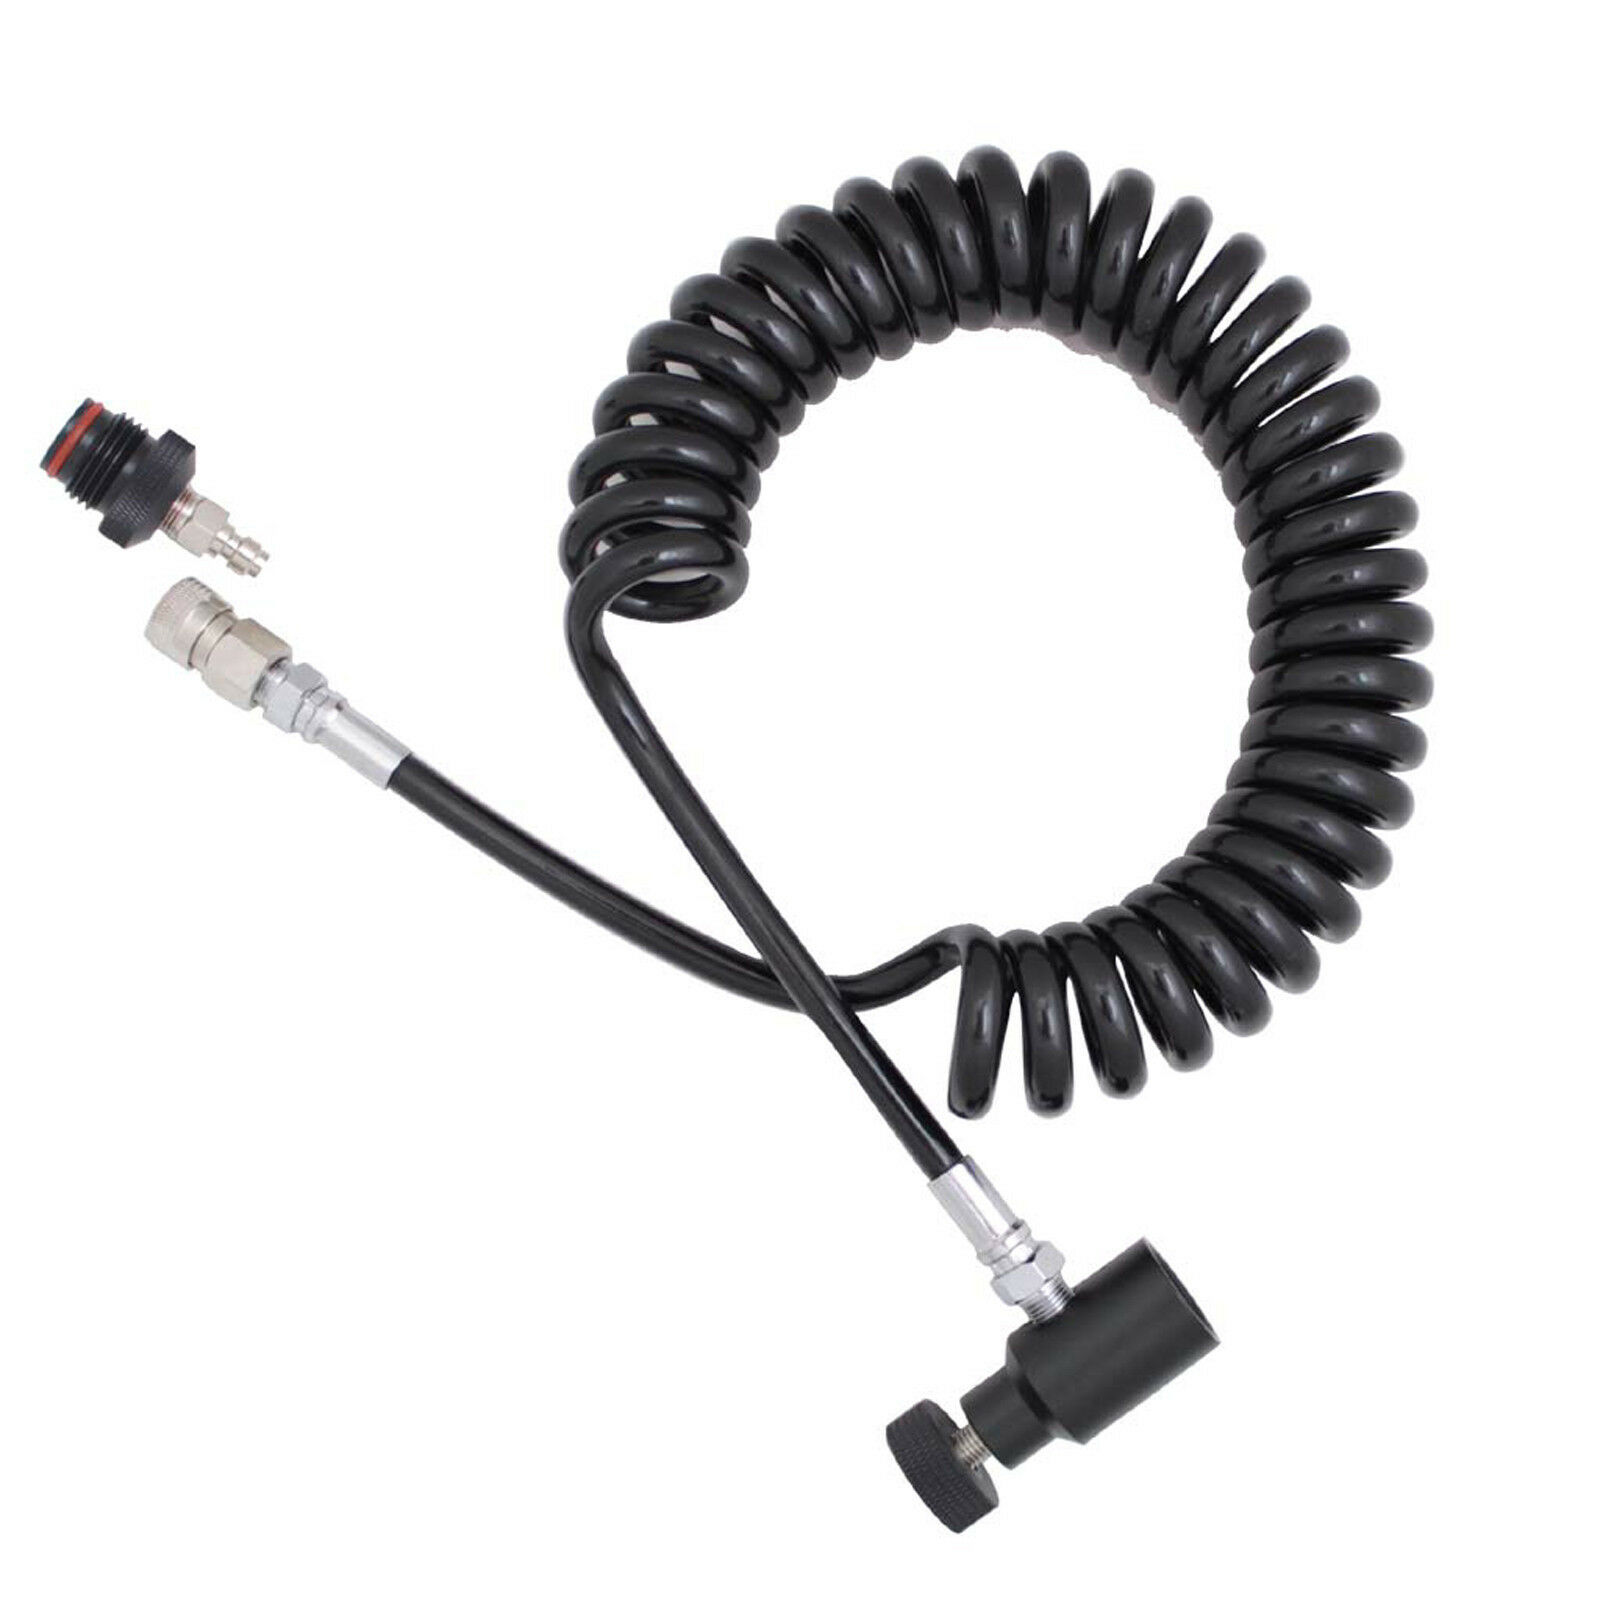 G7 Paintball Hpa Co2 Coiled Remote Line, Quick-disconnect. Asa Adapter Free Ship